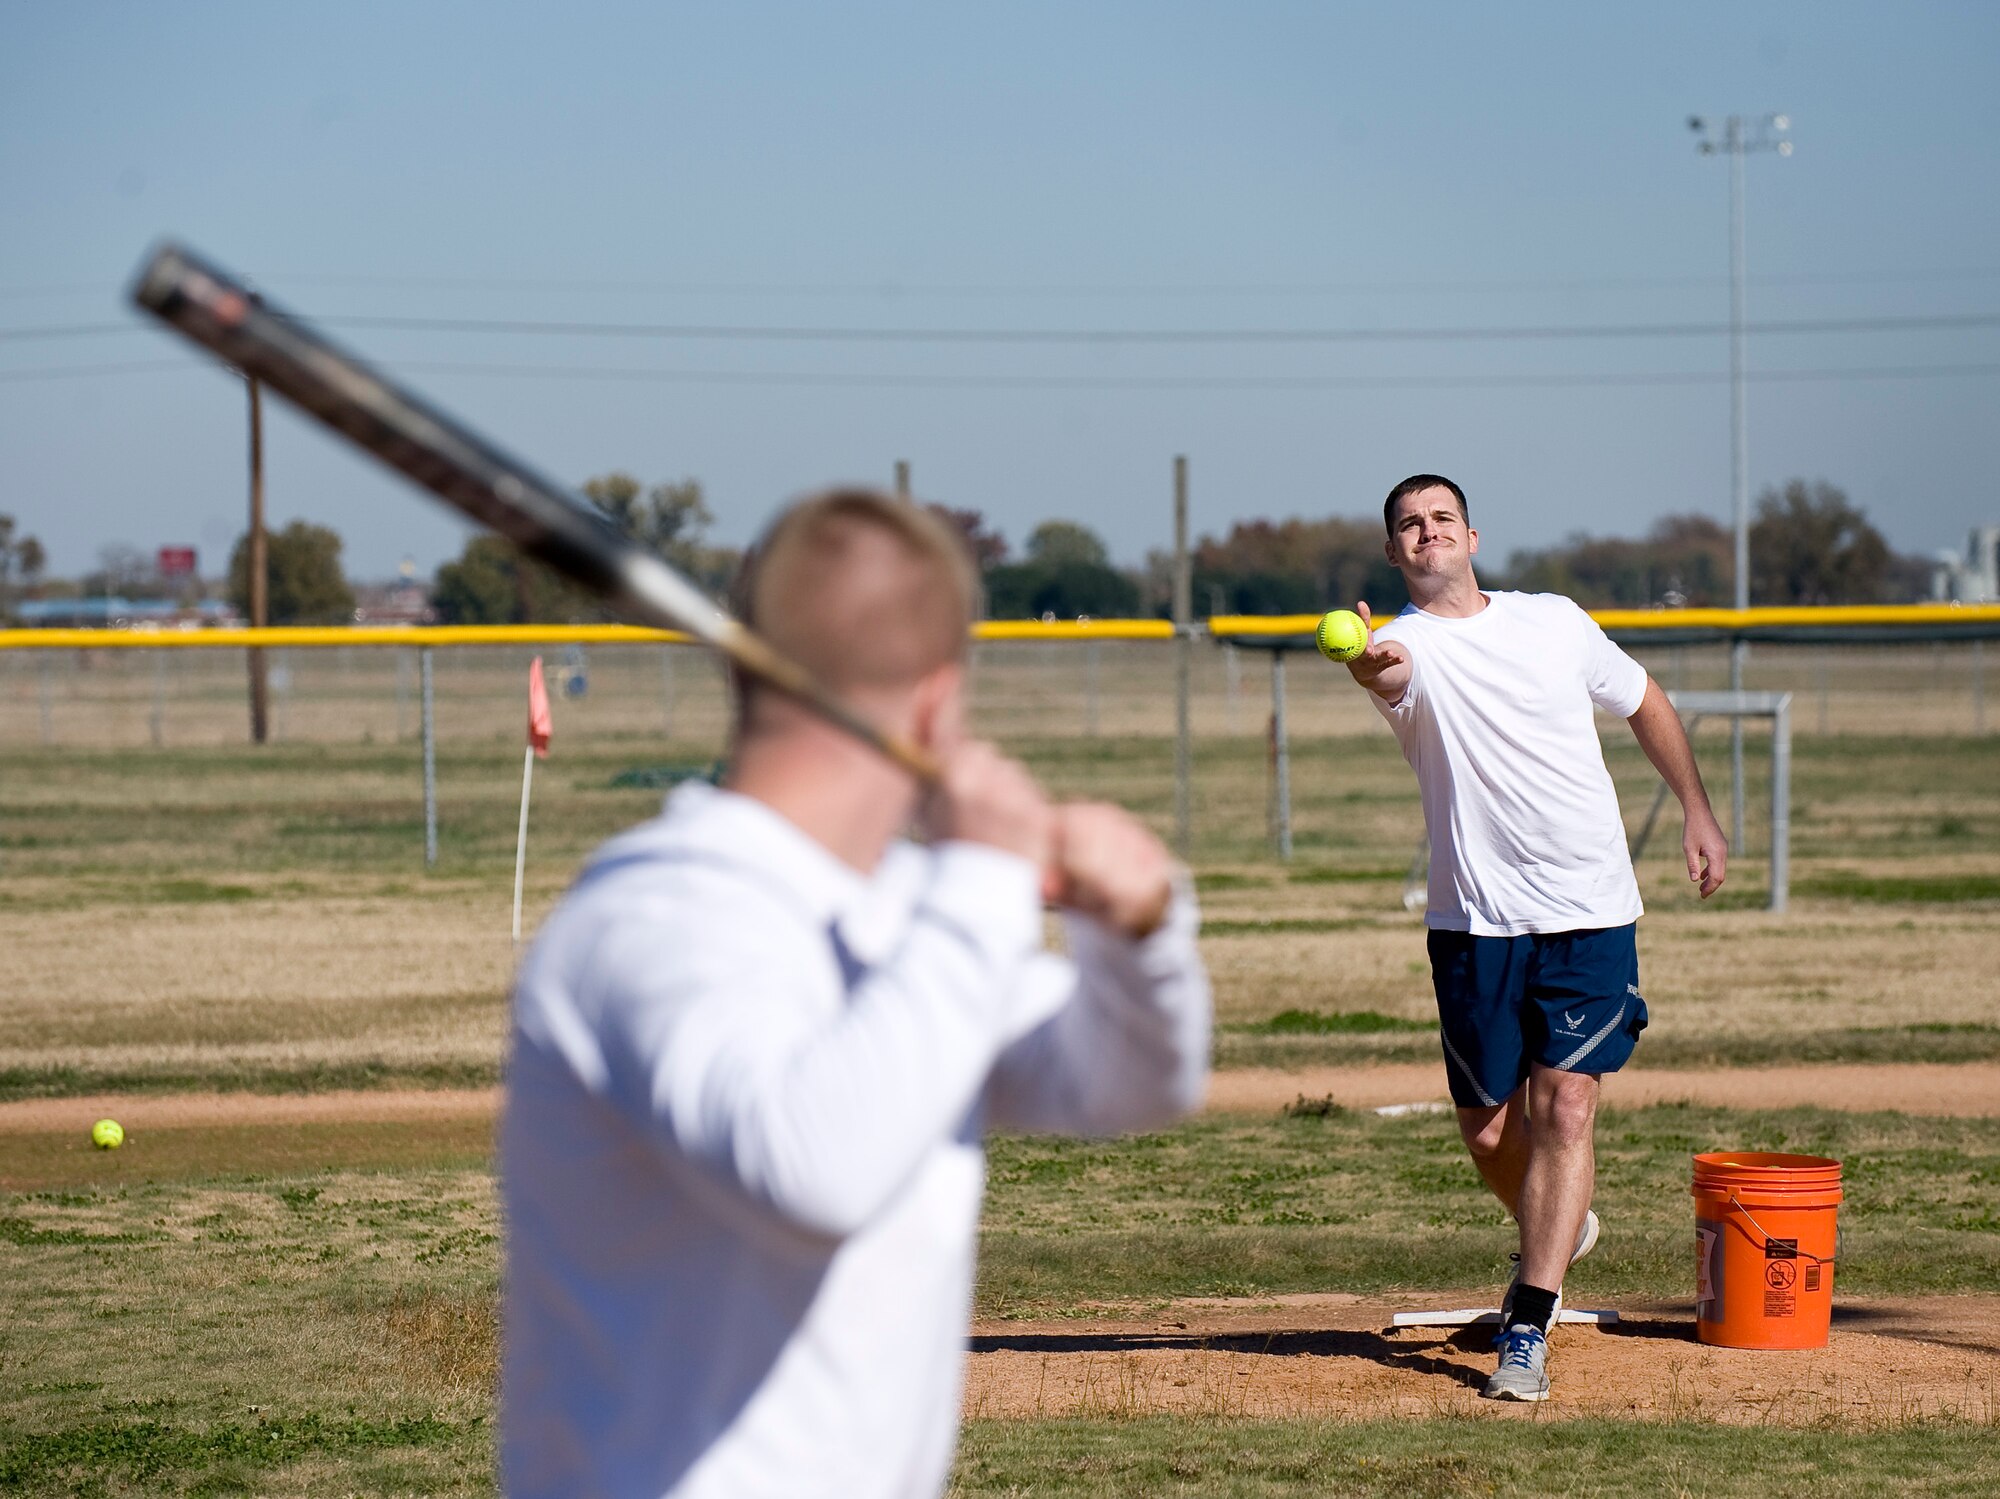 Tech. Sgt. Jason Wilkin, 2nd Contracting Squadron, pitches a ball to Airman 1st Class Kristopher Tolar, 2 CONS, during the homerun derby on Barksdale Air Force Base, La., Nov. 16. The derby was part of the 2012 Sports Day, an annual event that gives Airmen the opportunity to participate in several individual and team sports throughout the day. (U.S. Air Force photo/Staff Sgt. Chad Warren)(RELEASED)